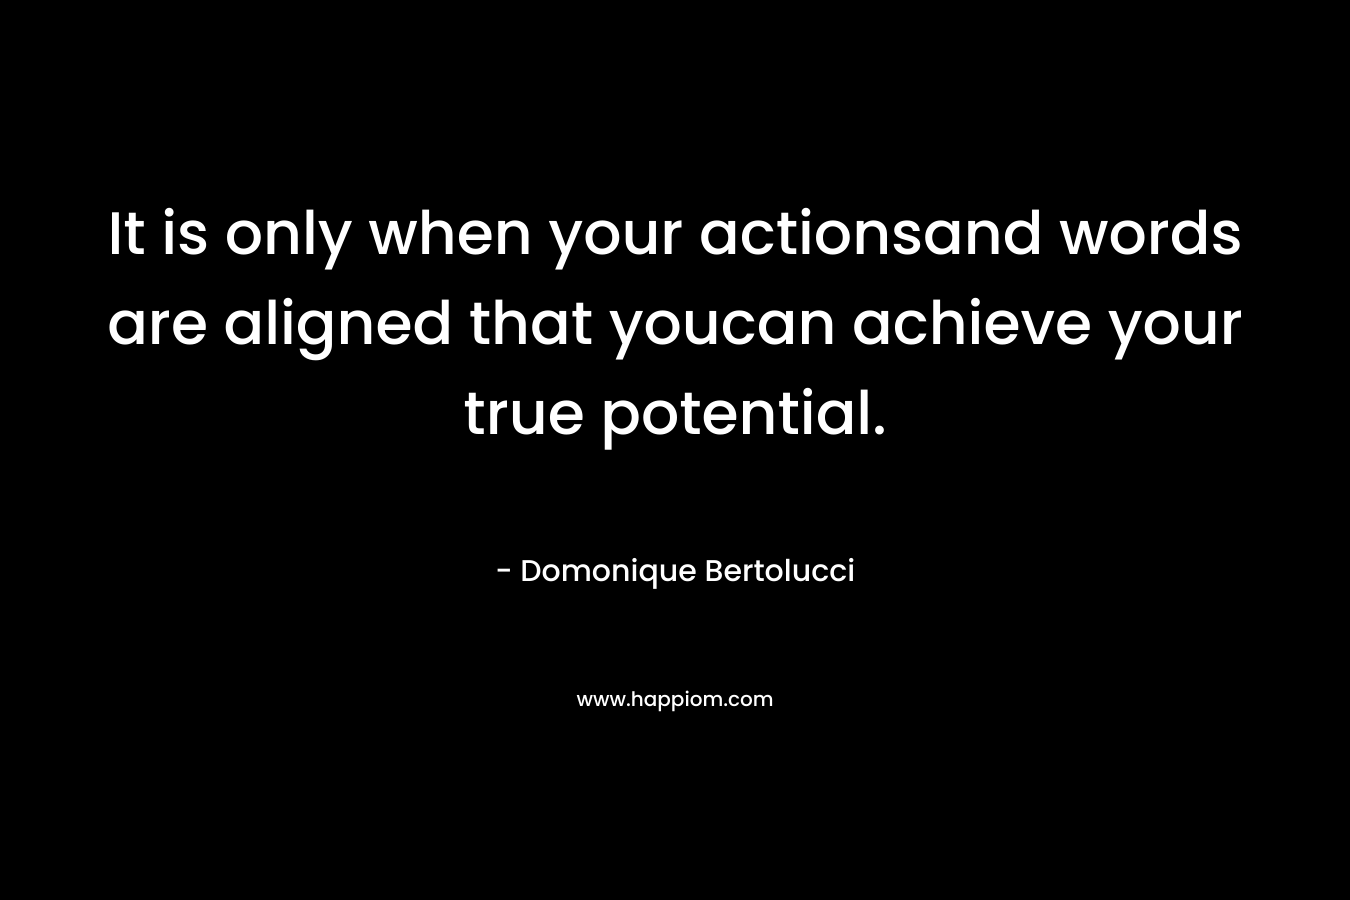 It is only when your actionsand words are aligned that youcan achieve your true potential.